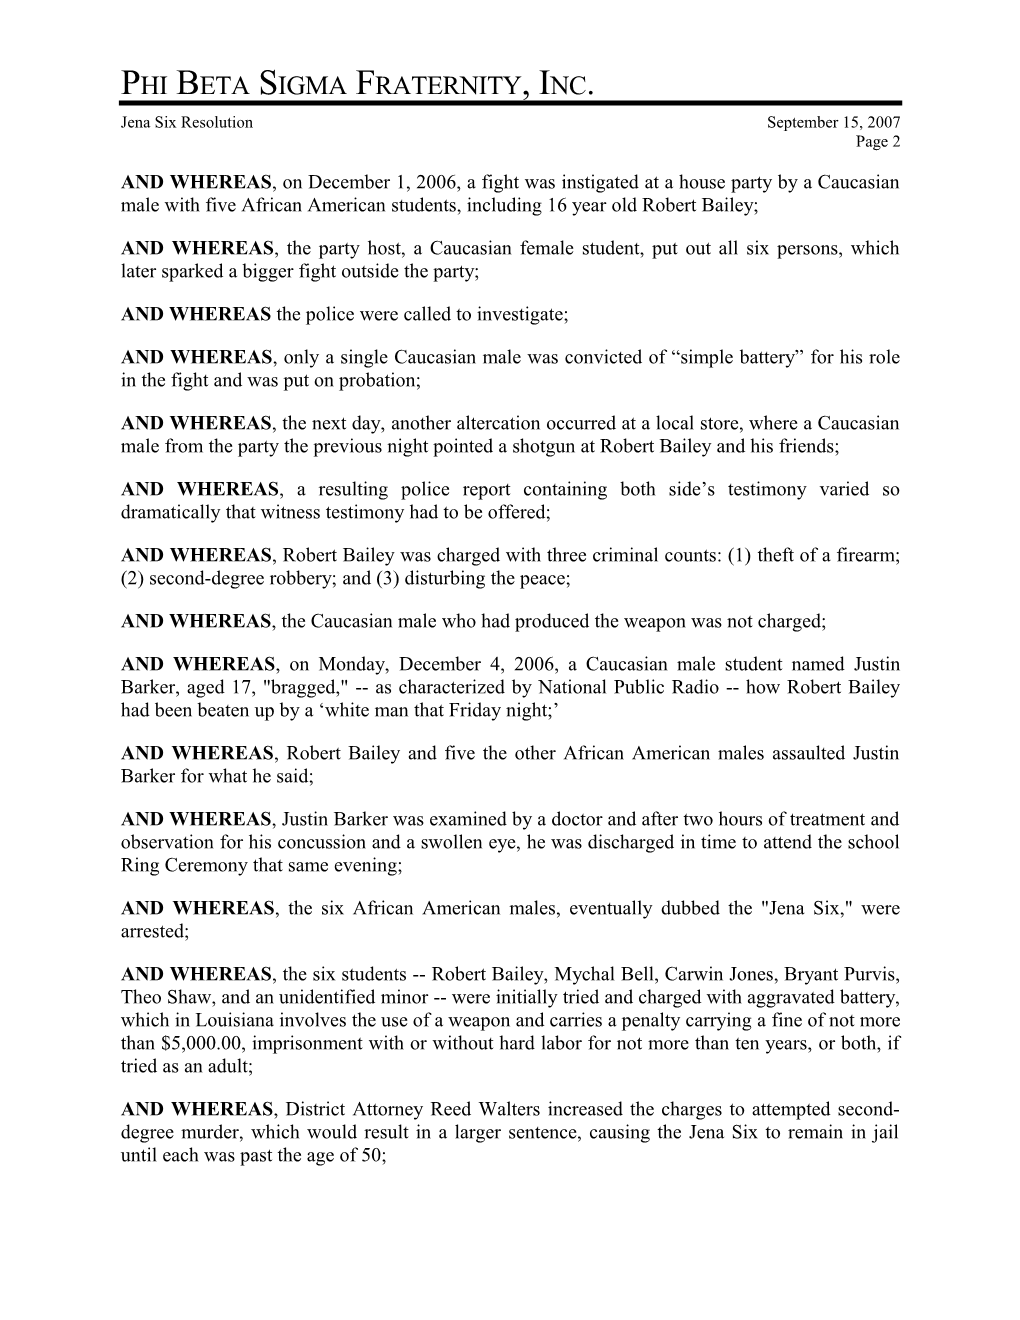 Resolution for the Brothers of Phi Beta Sigma Fraternity to Stand up Against the Injustice